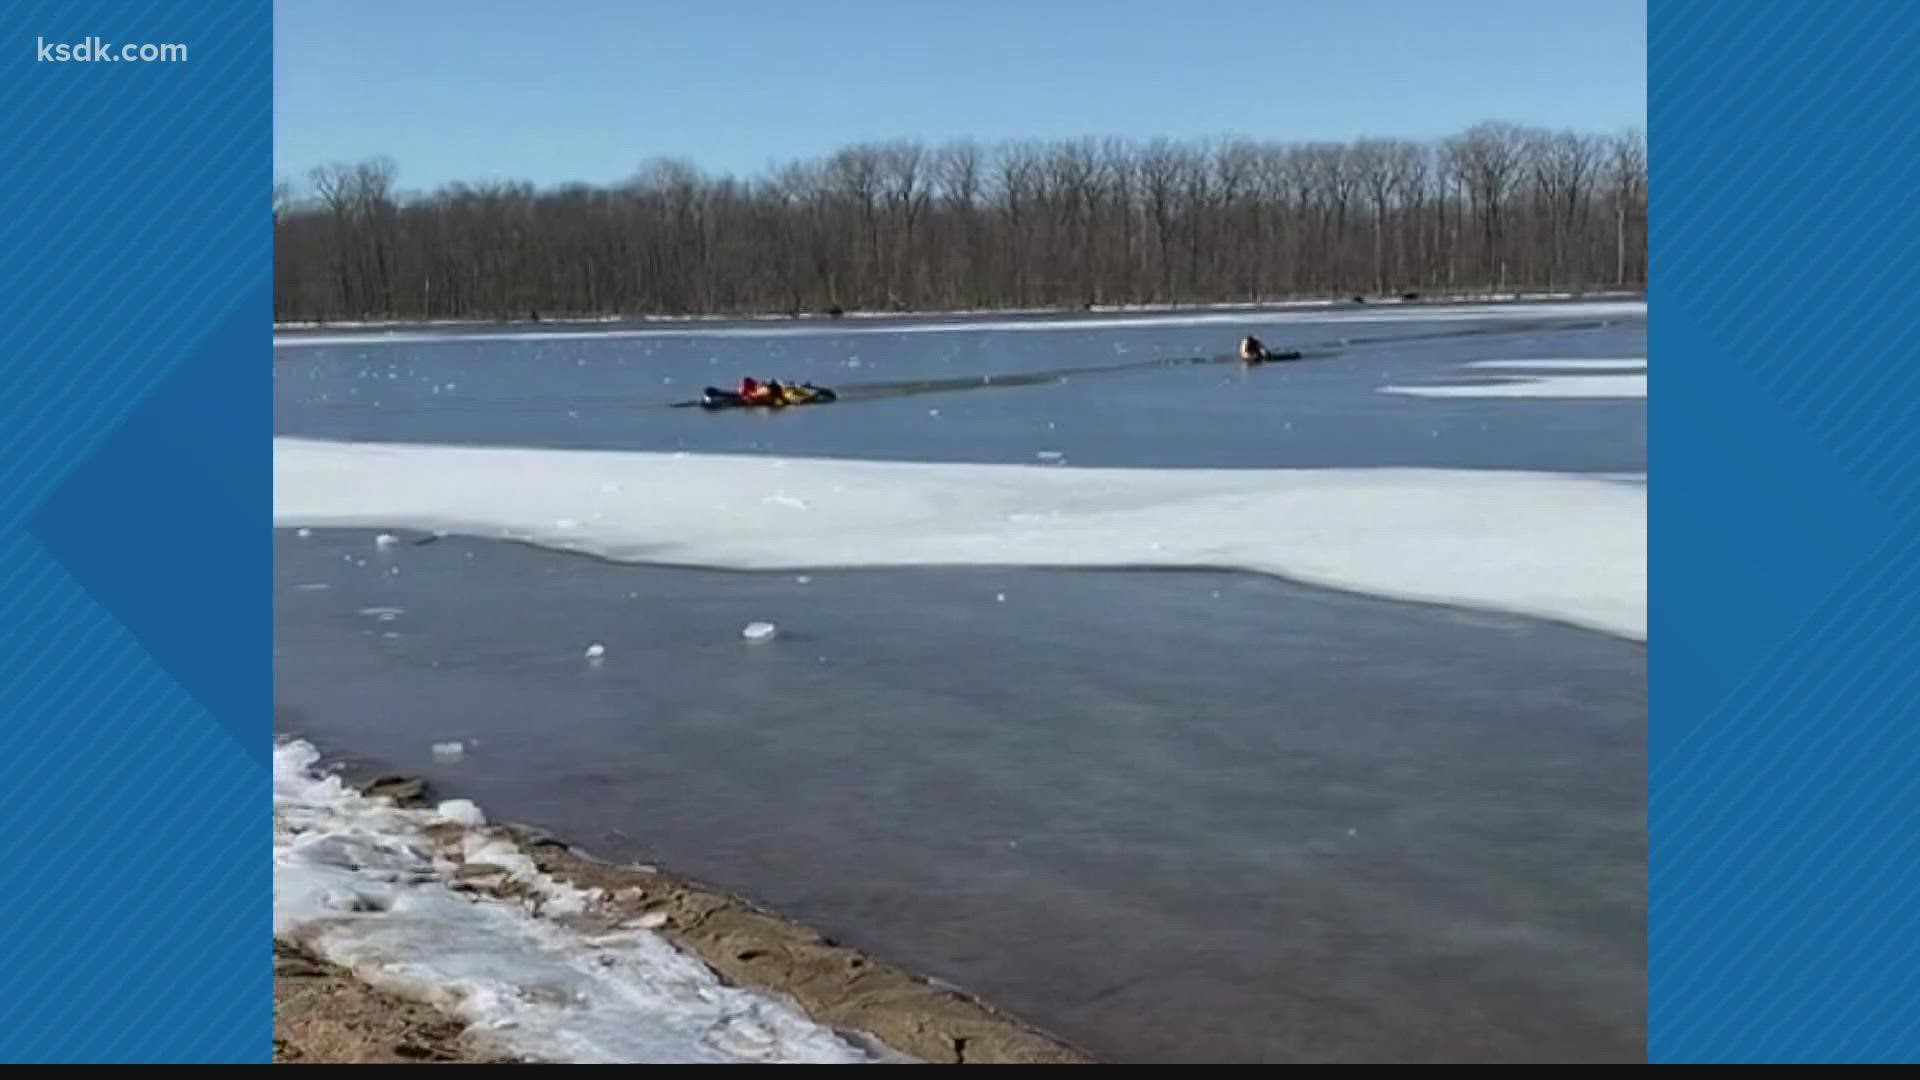 Both people were pulled from the ice without injuries by first responders who happened to be at the lake doing ice training.